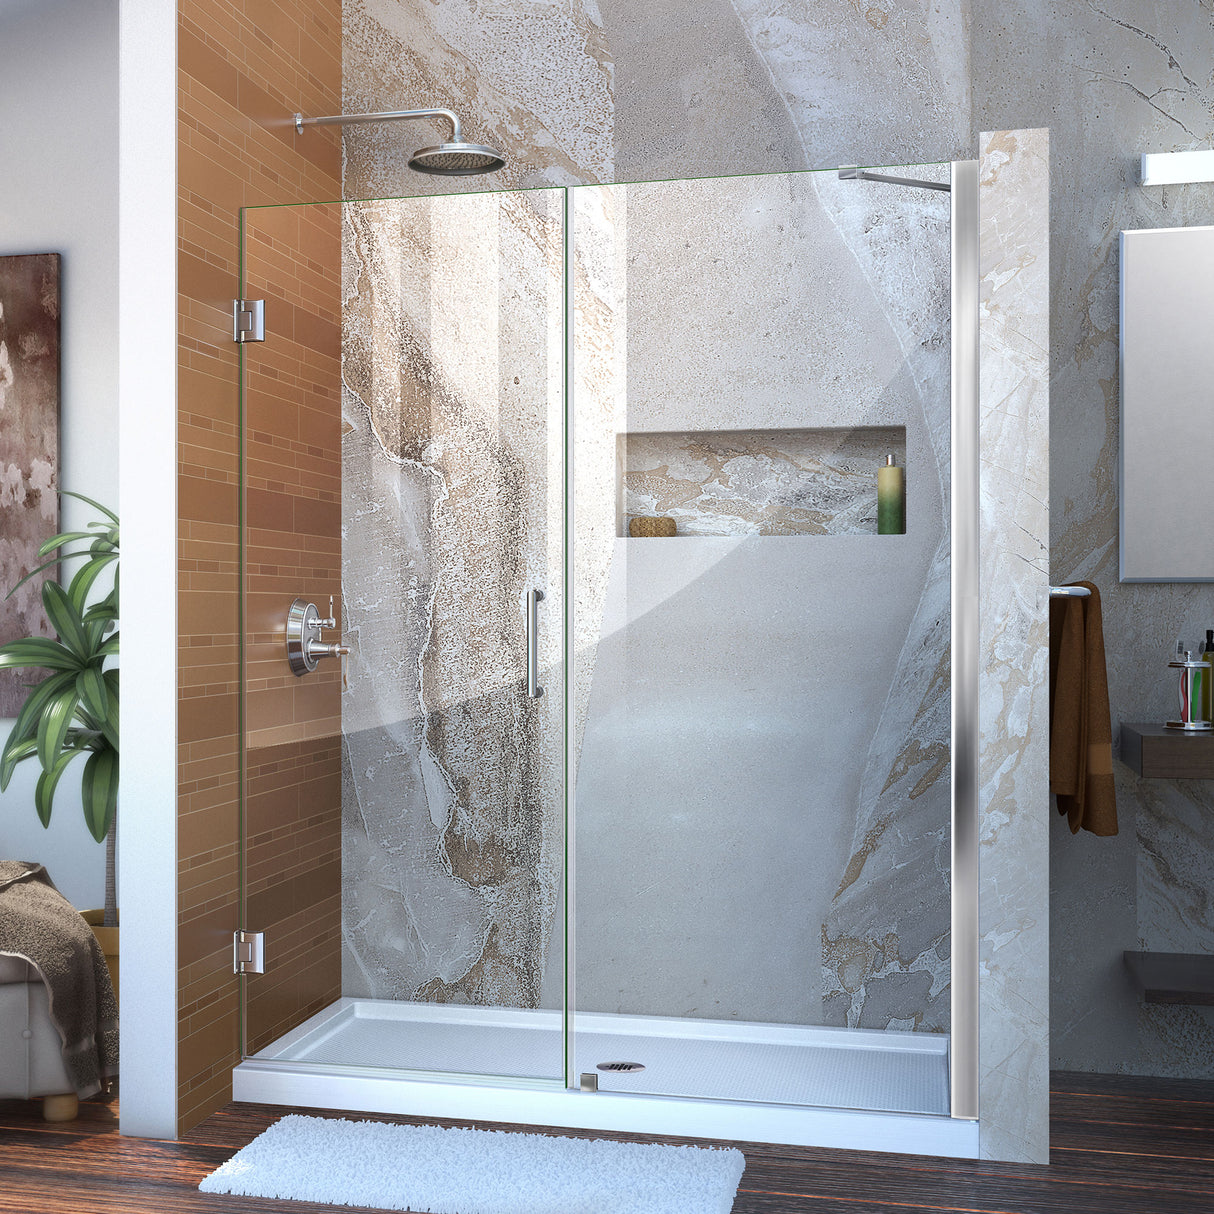 DreamLine Unidoor 54-55 in. W x 72 in. H Frameless Hinged Shower Door with Support Arm in Chrome